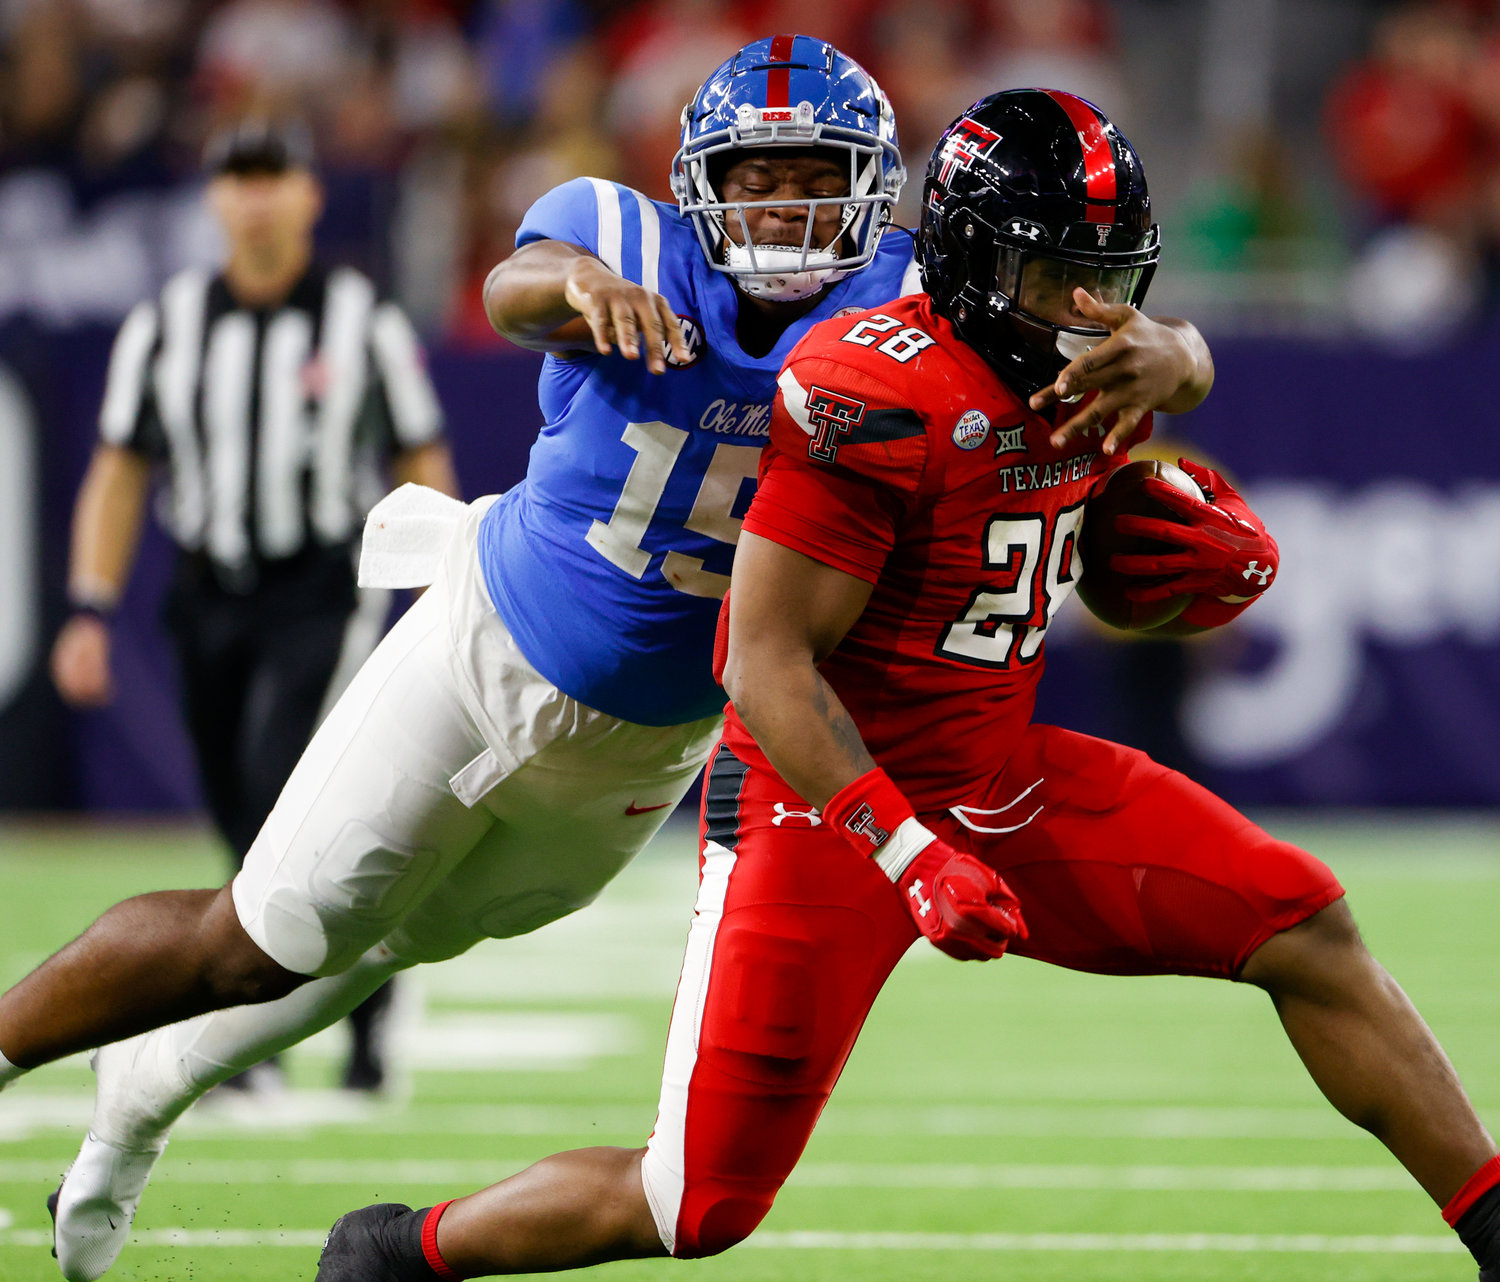 Mississippi defensive end Jared Ivey (15) works to bring down Texas Tech running back Tahj Brooks (28) on a carry during the TaxAct Texas Bowl on Dec. 28, 2022 in Houston.